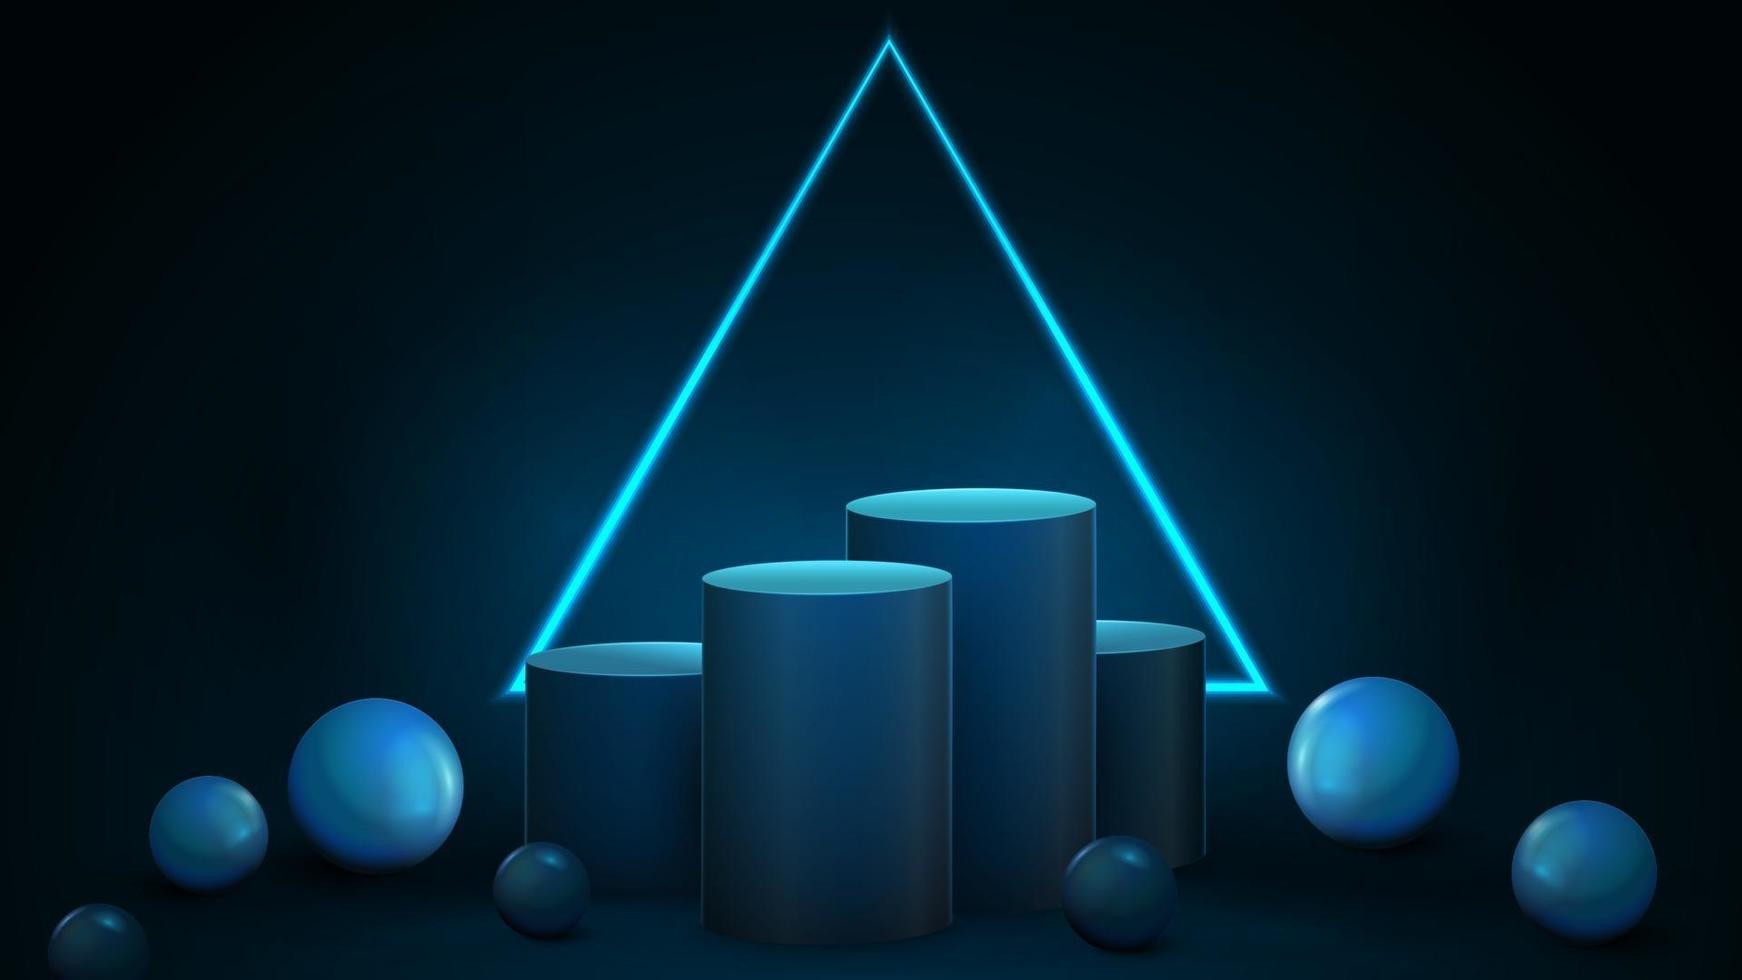 Empty blue winners cylindrical pedestals with neon triangular frame vector